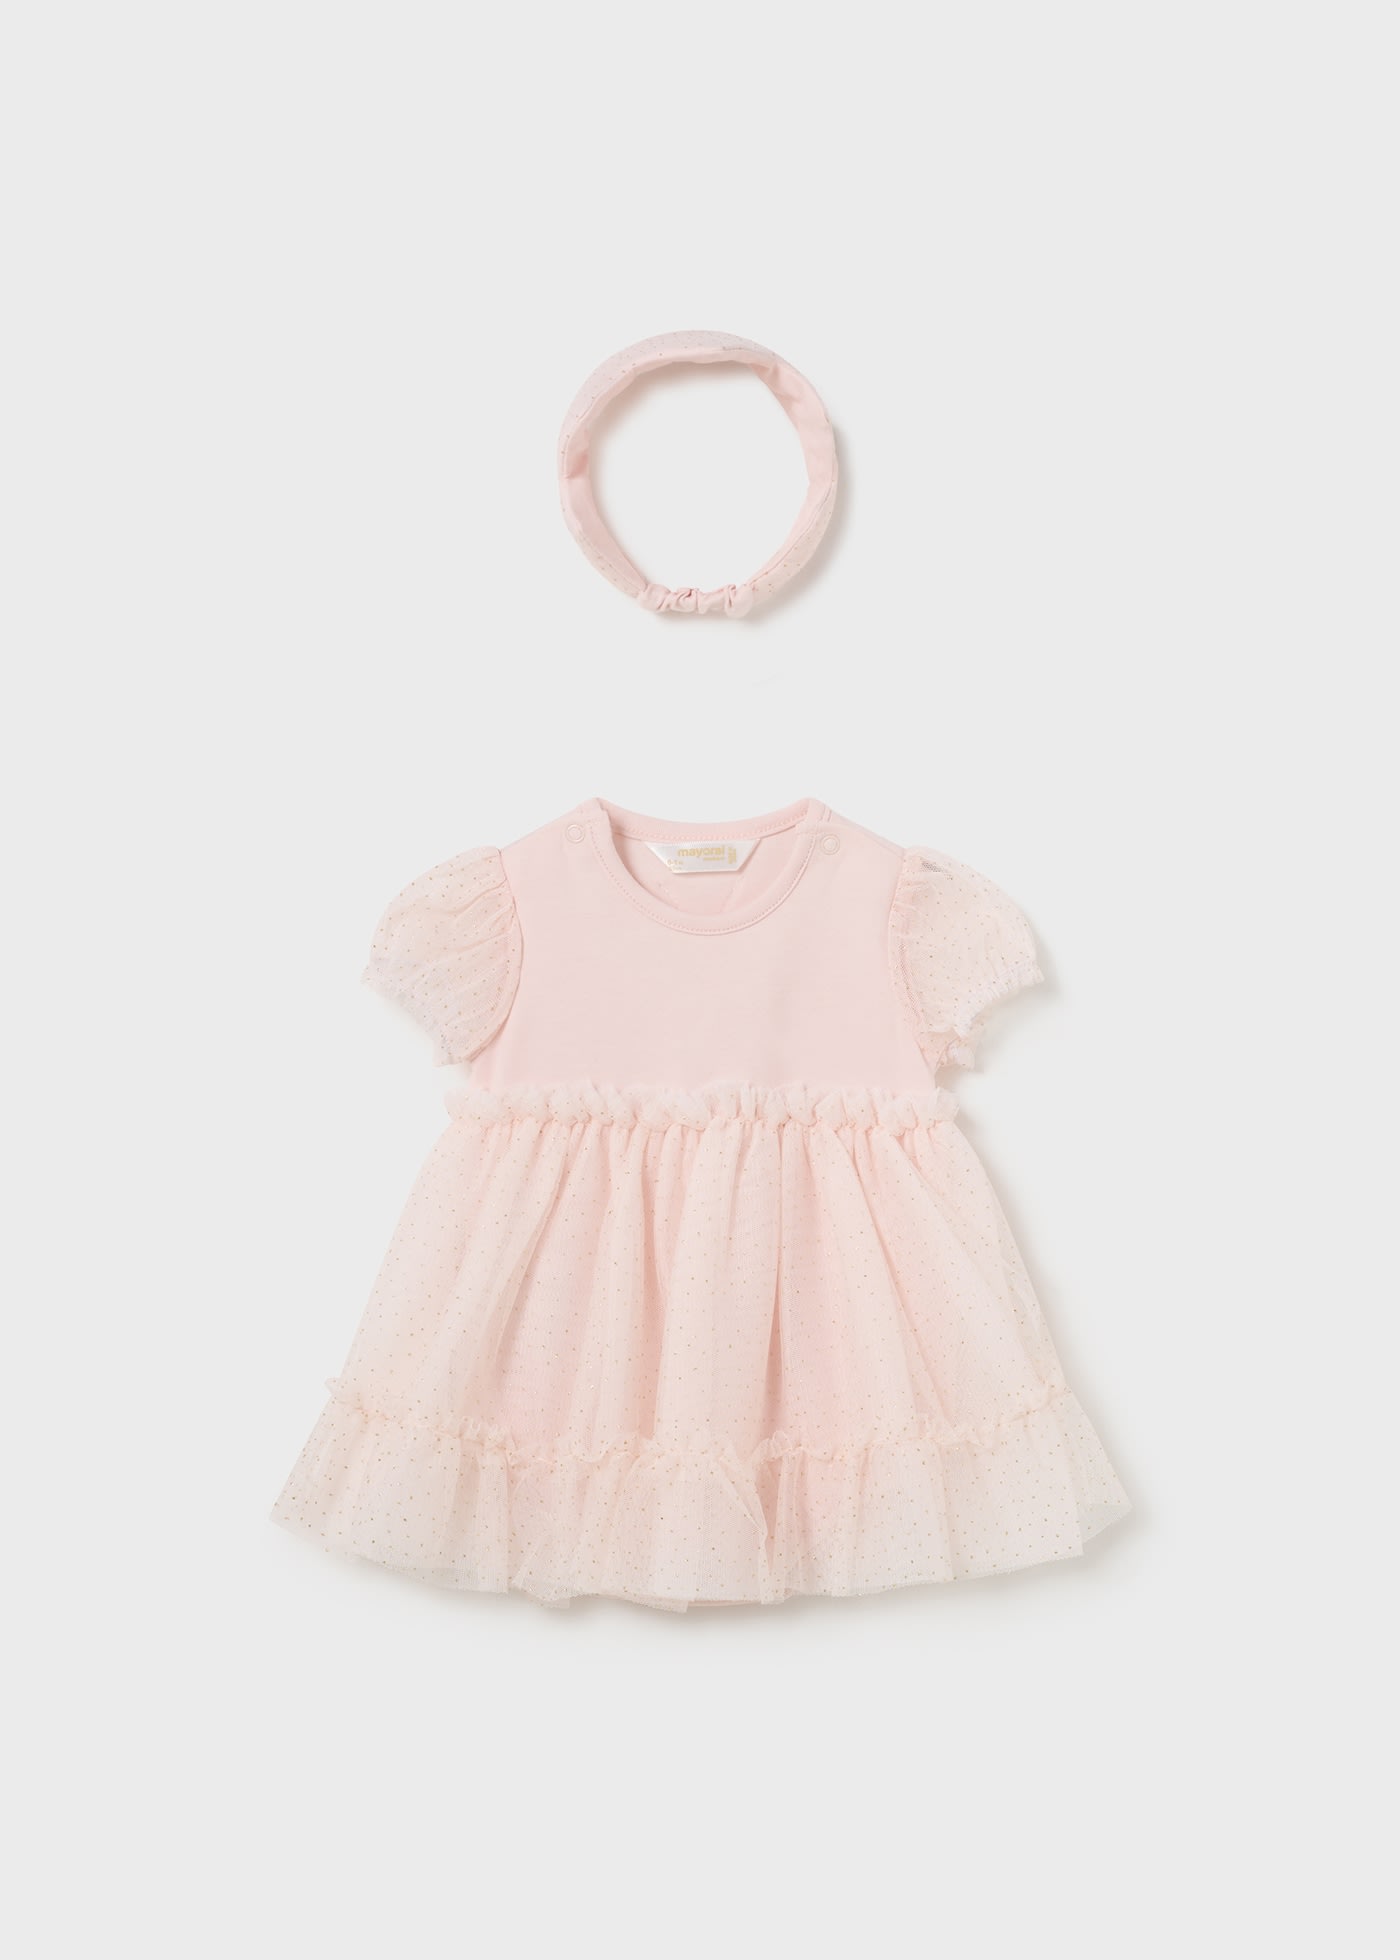 Newborn Romper with Tulle Skirt and Crown